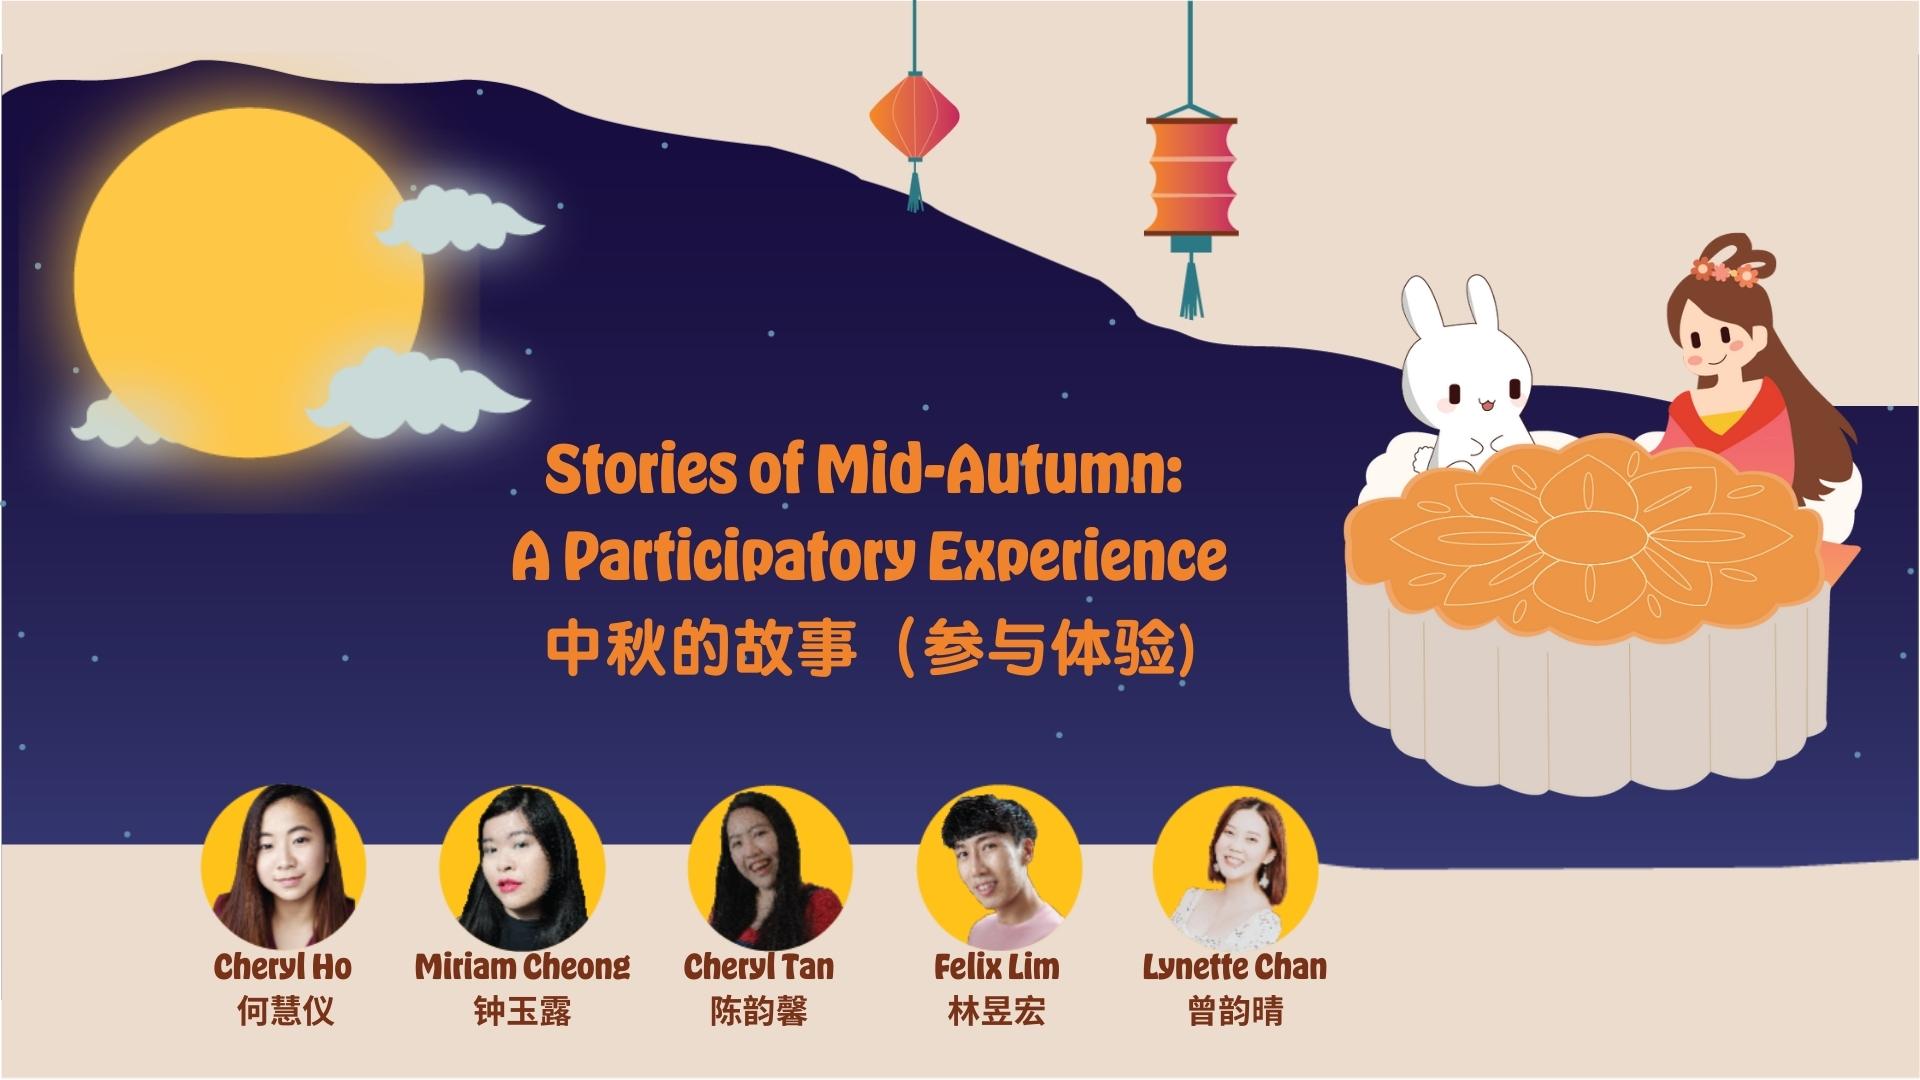 A Stories of Mid-Autumn poster featuring various artists and influencers